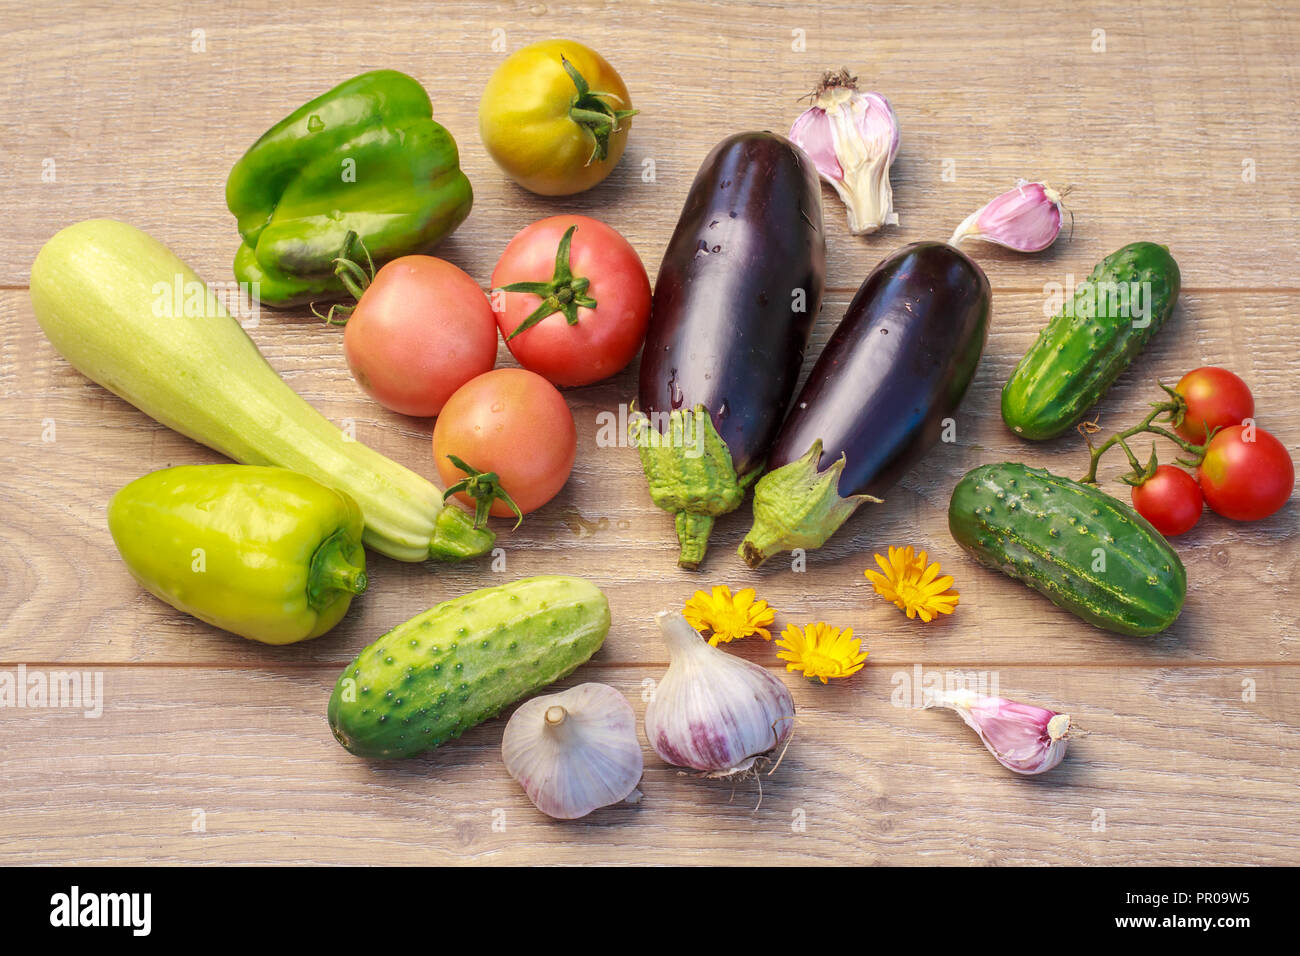 Just picked zucchini, tomatoes, bell peppers, eggplants, garlic and cucumber on wooden board. Just harvested vegetables. Top view Stock Photo